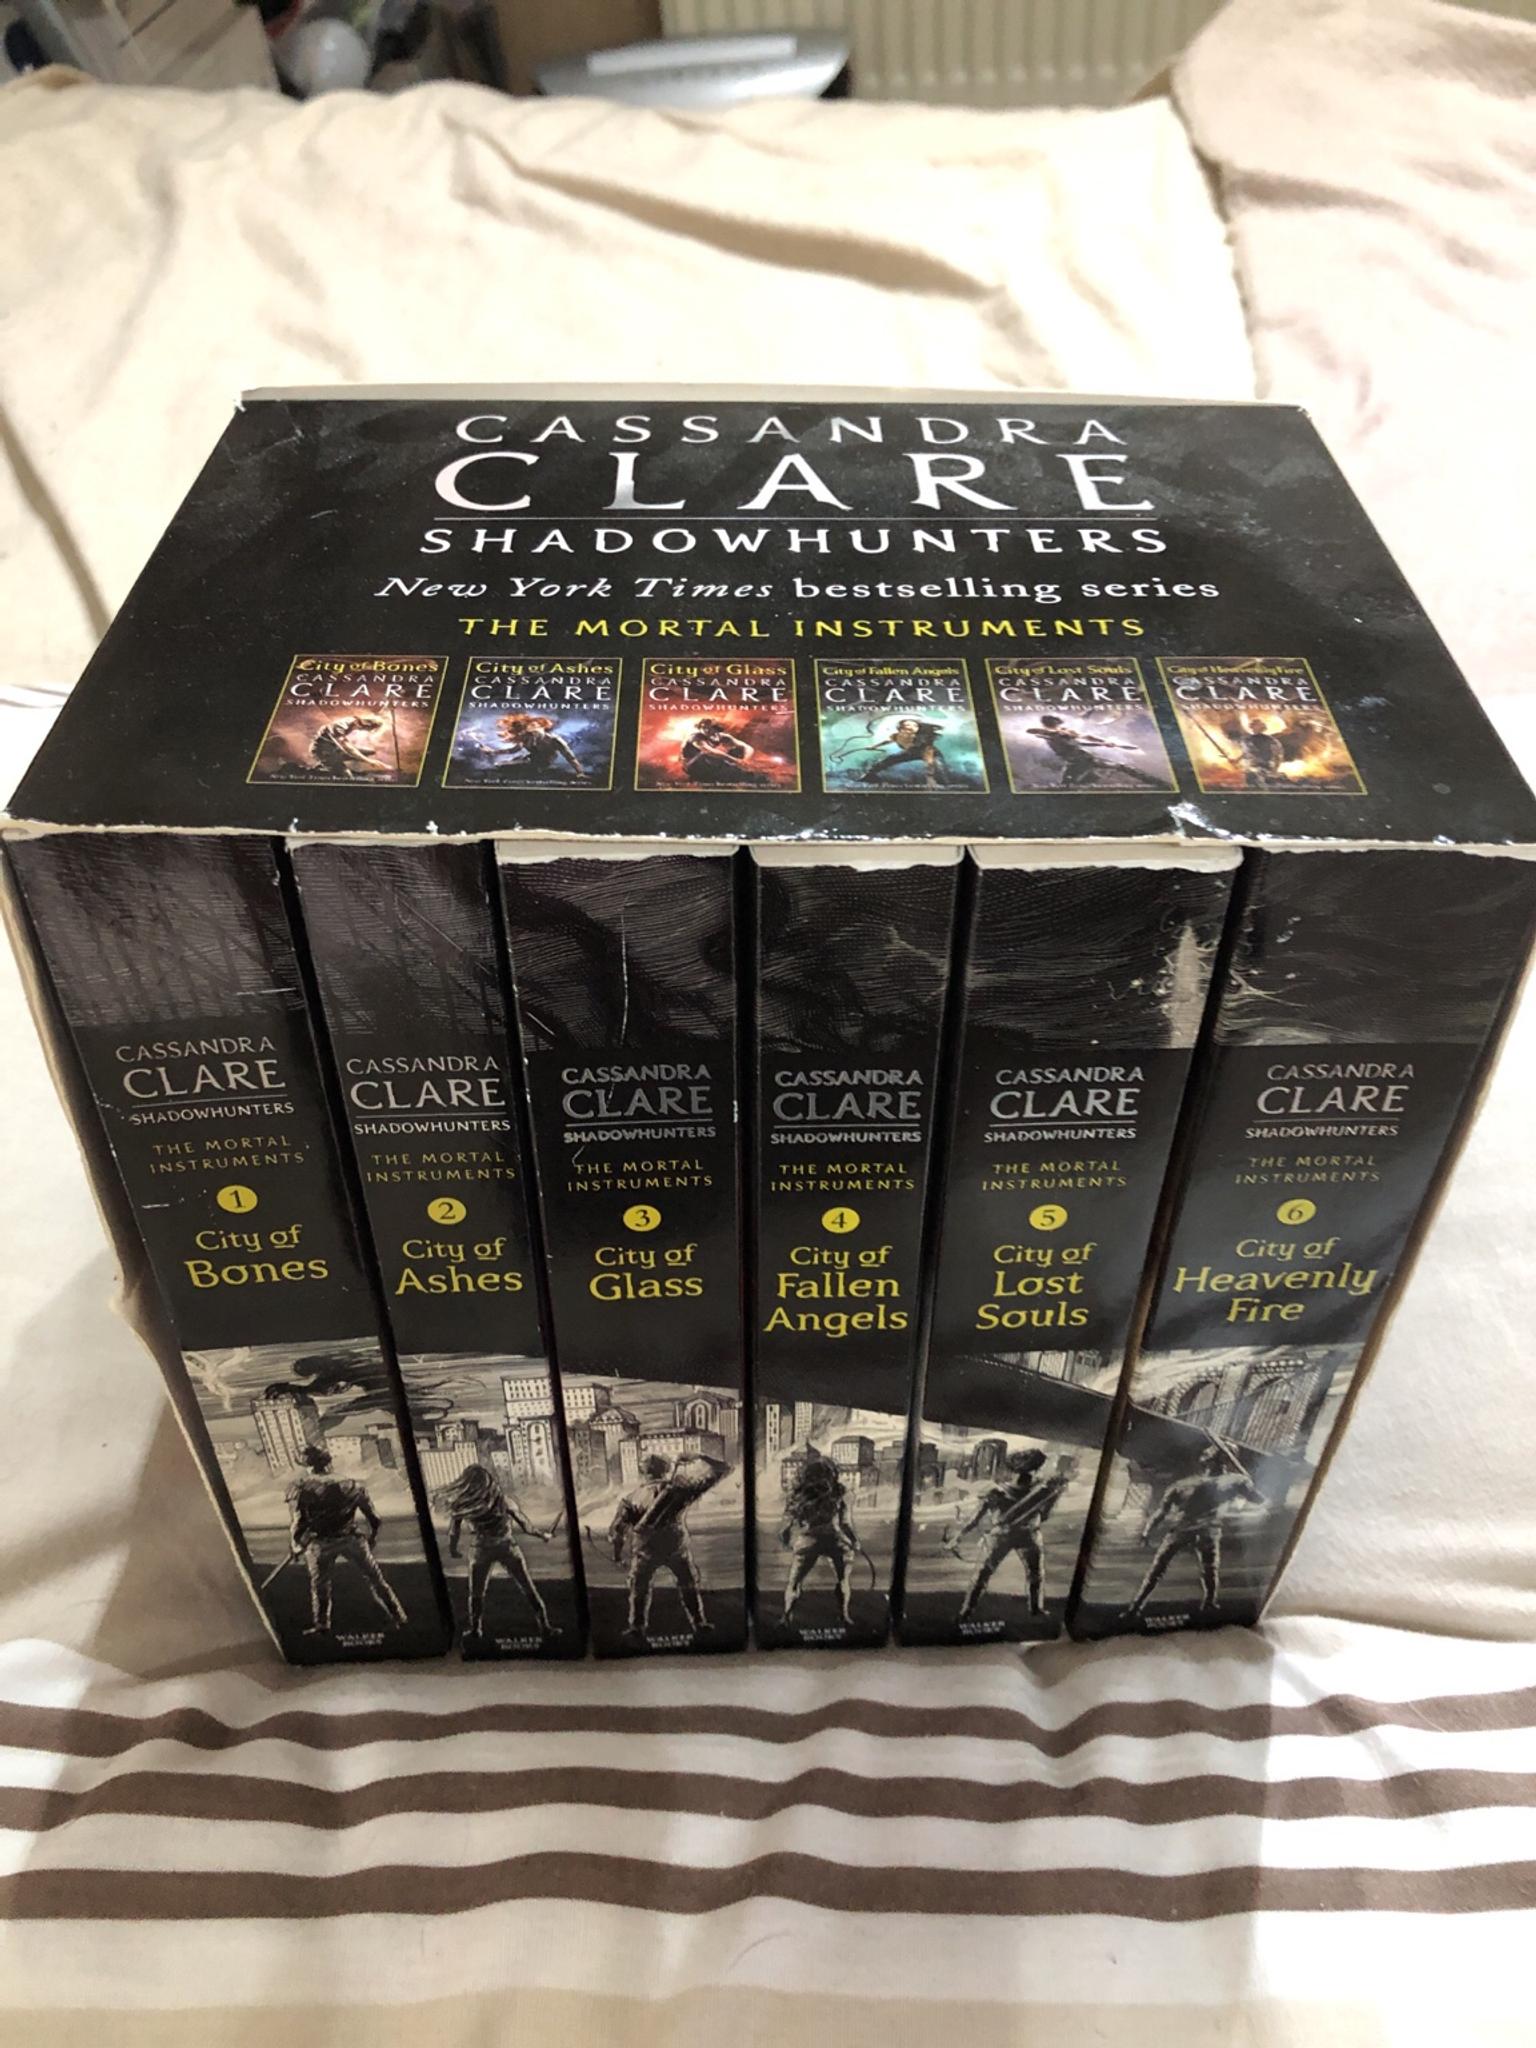 Shadowhunters The Mortal Instruments Books In Hx2 Calderdale For 10 00 For Sale Shpock